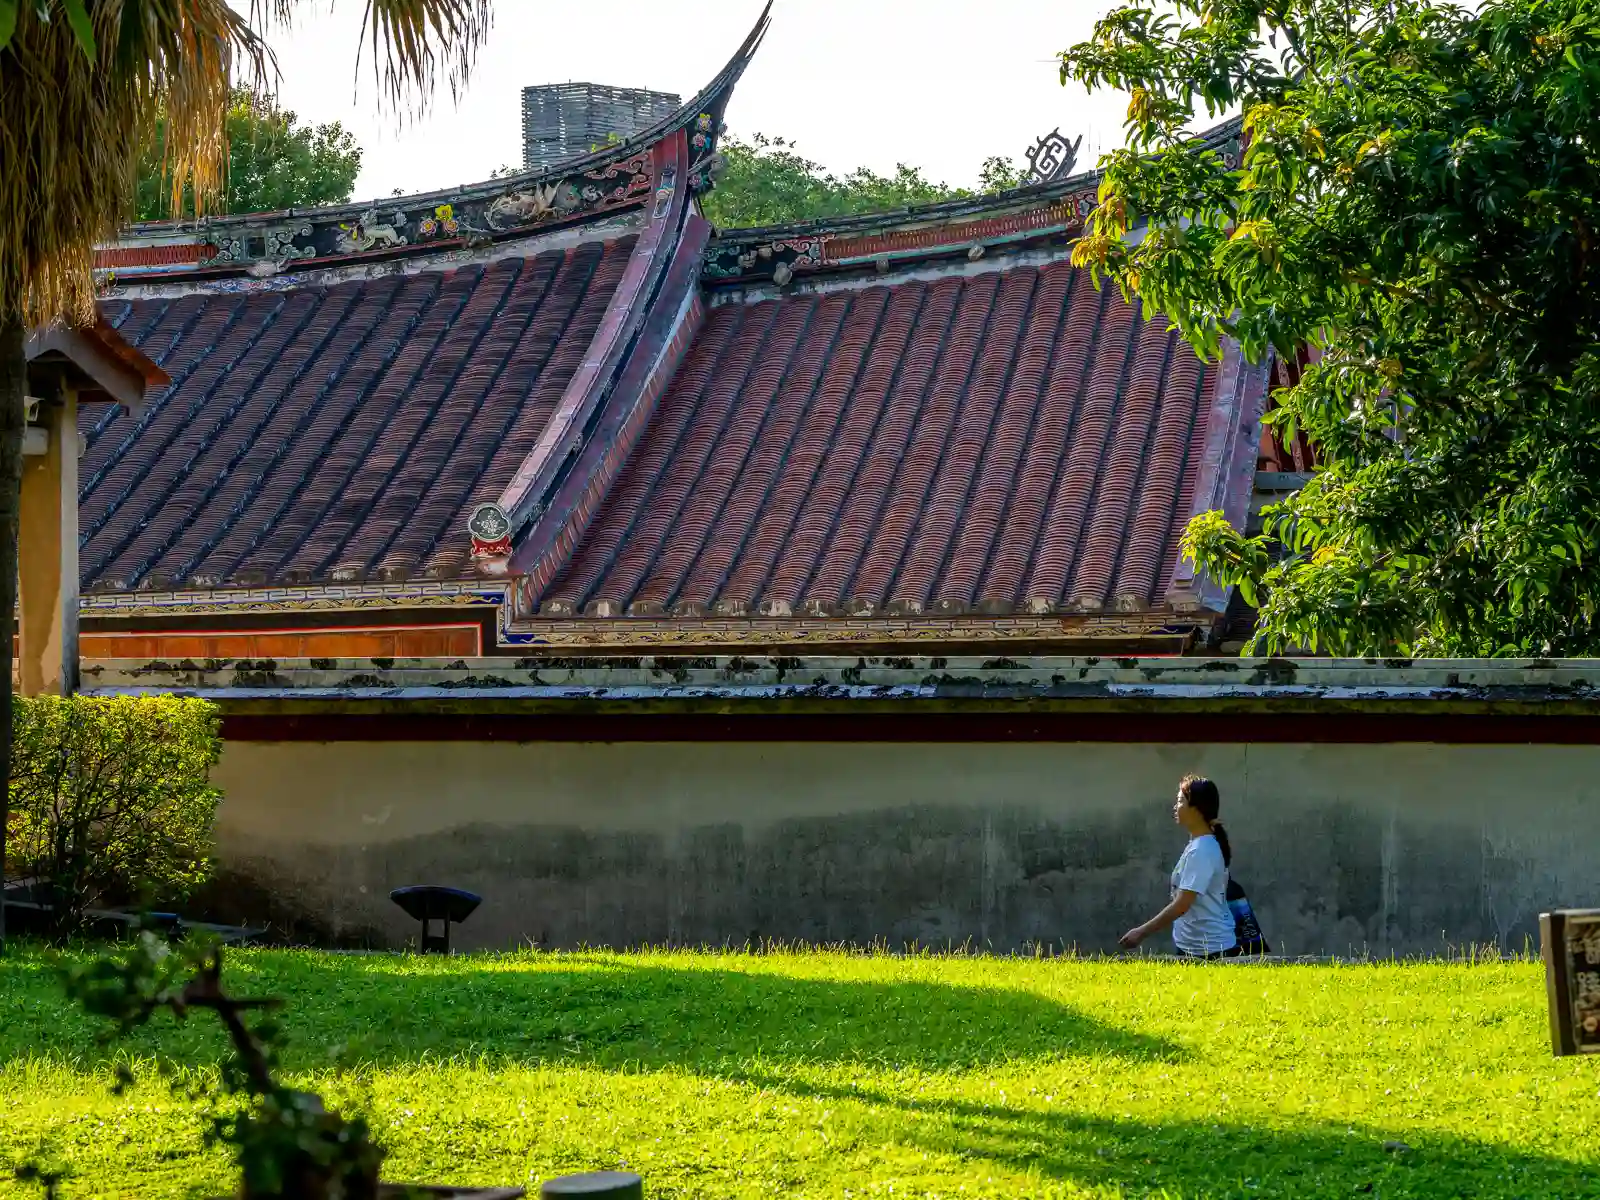 A tourist is seen walking in the gardens, above her, the roof ridge is decorated with painted wooden carvings.